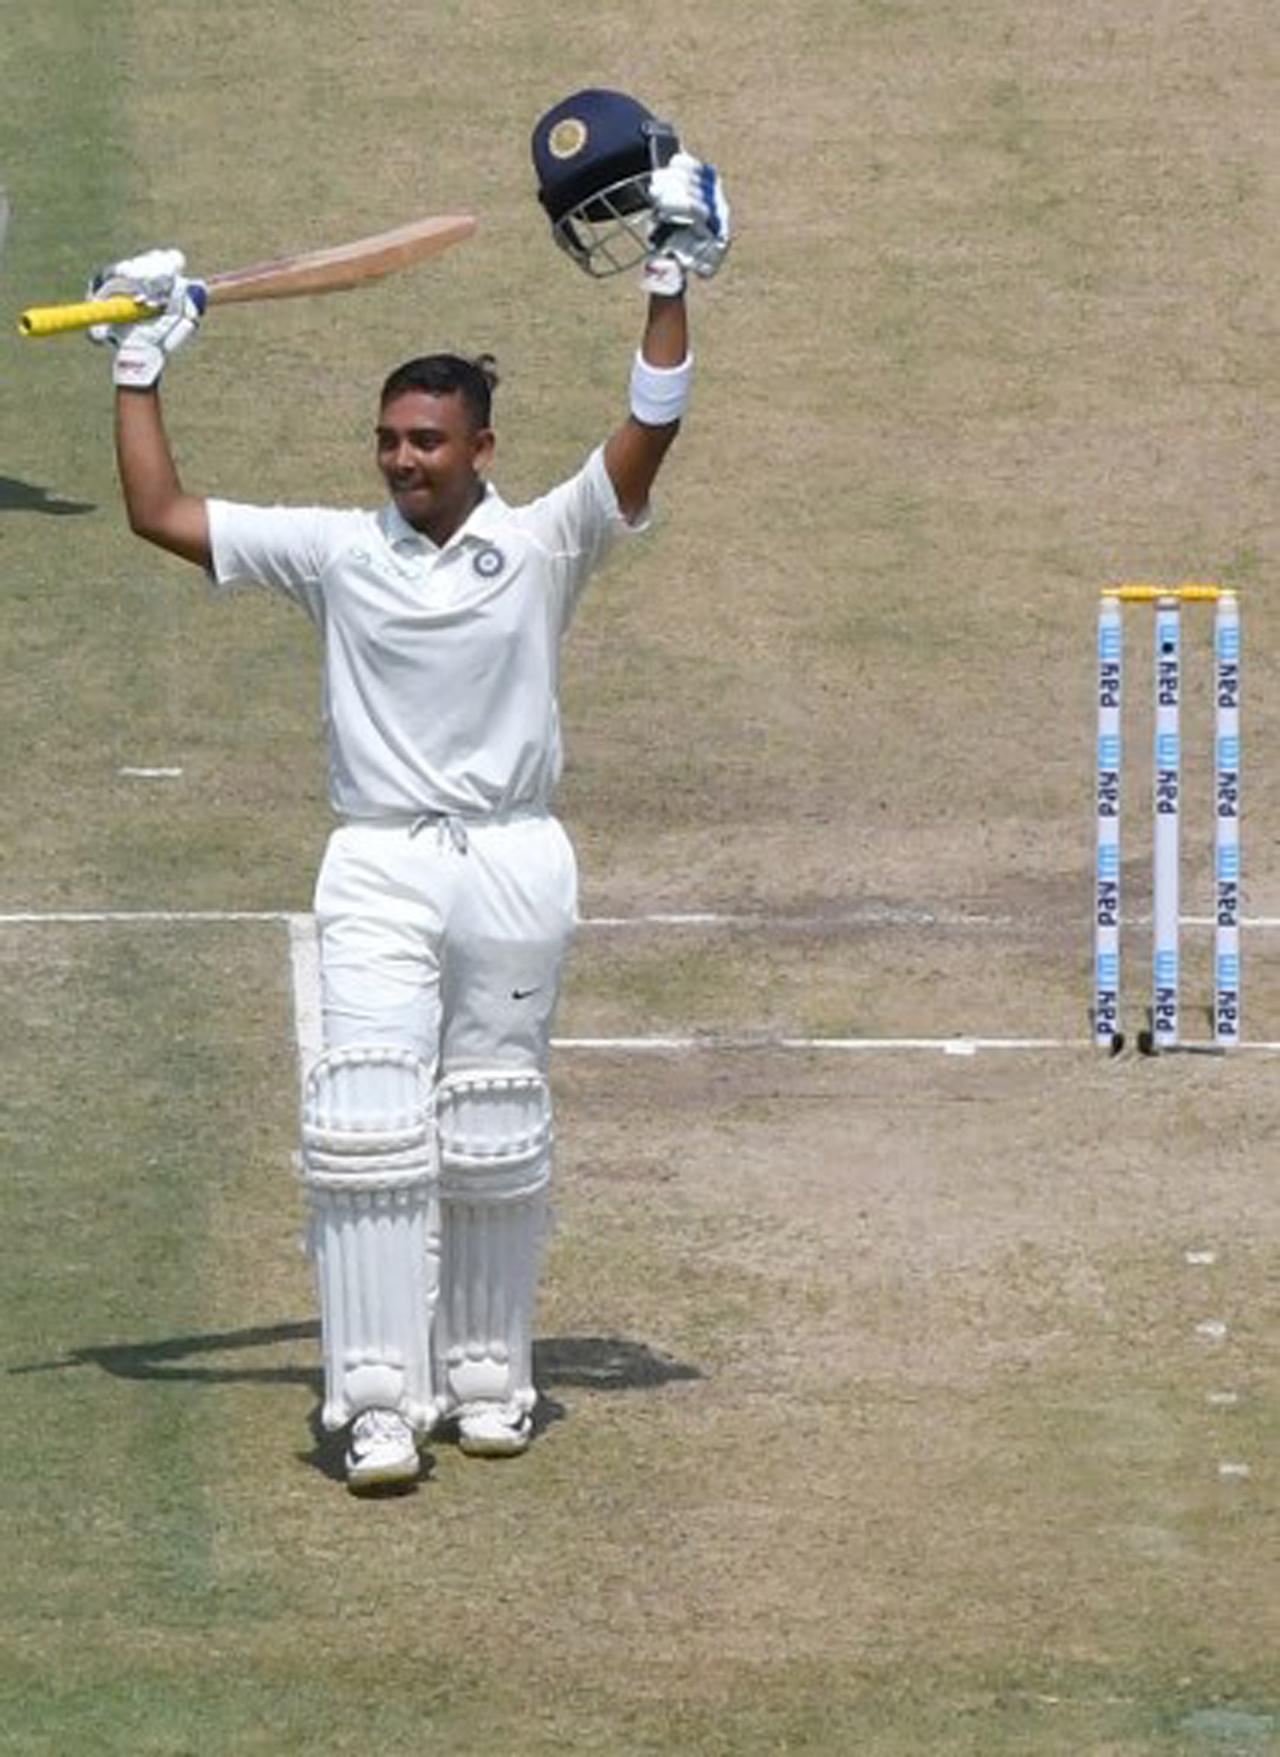 In October 2018, Mumbai's young sensation, Prithvi Shaw scored a brilliant hundred on his Test debut at the at the Saurashtra Cricket Association Stadium against West Indies. Shaw hammered 154 runs in just 134 balls with 19 boundaries. He also had a 206-run second-wicket stand with Cheteshwar Pujara.